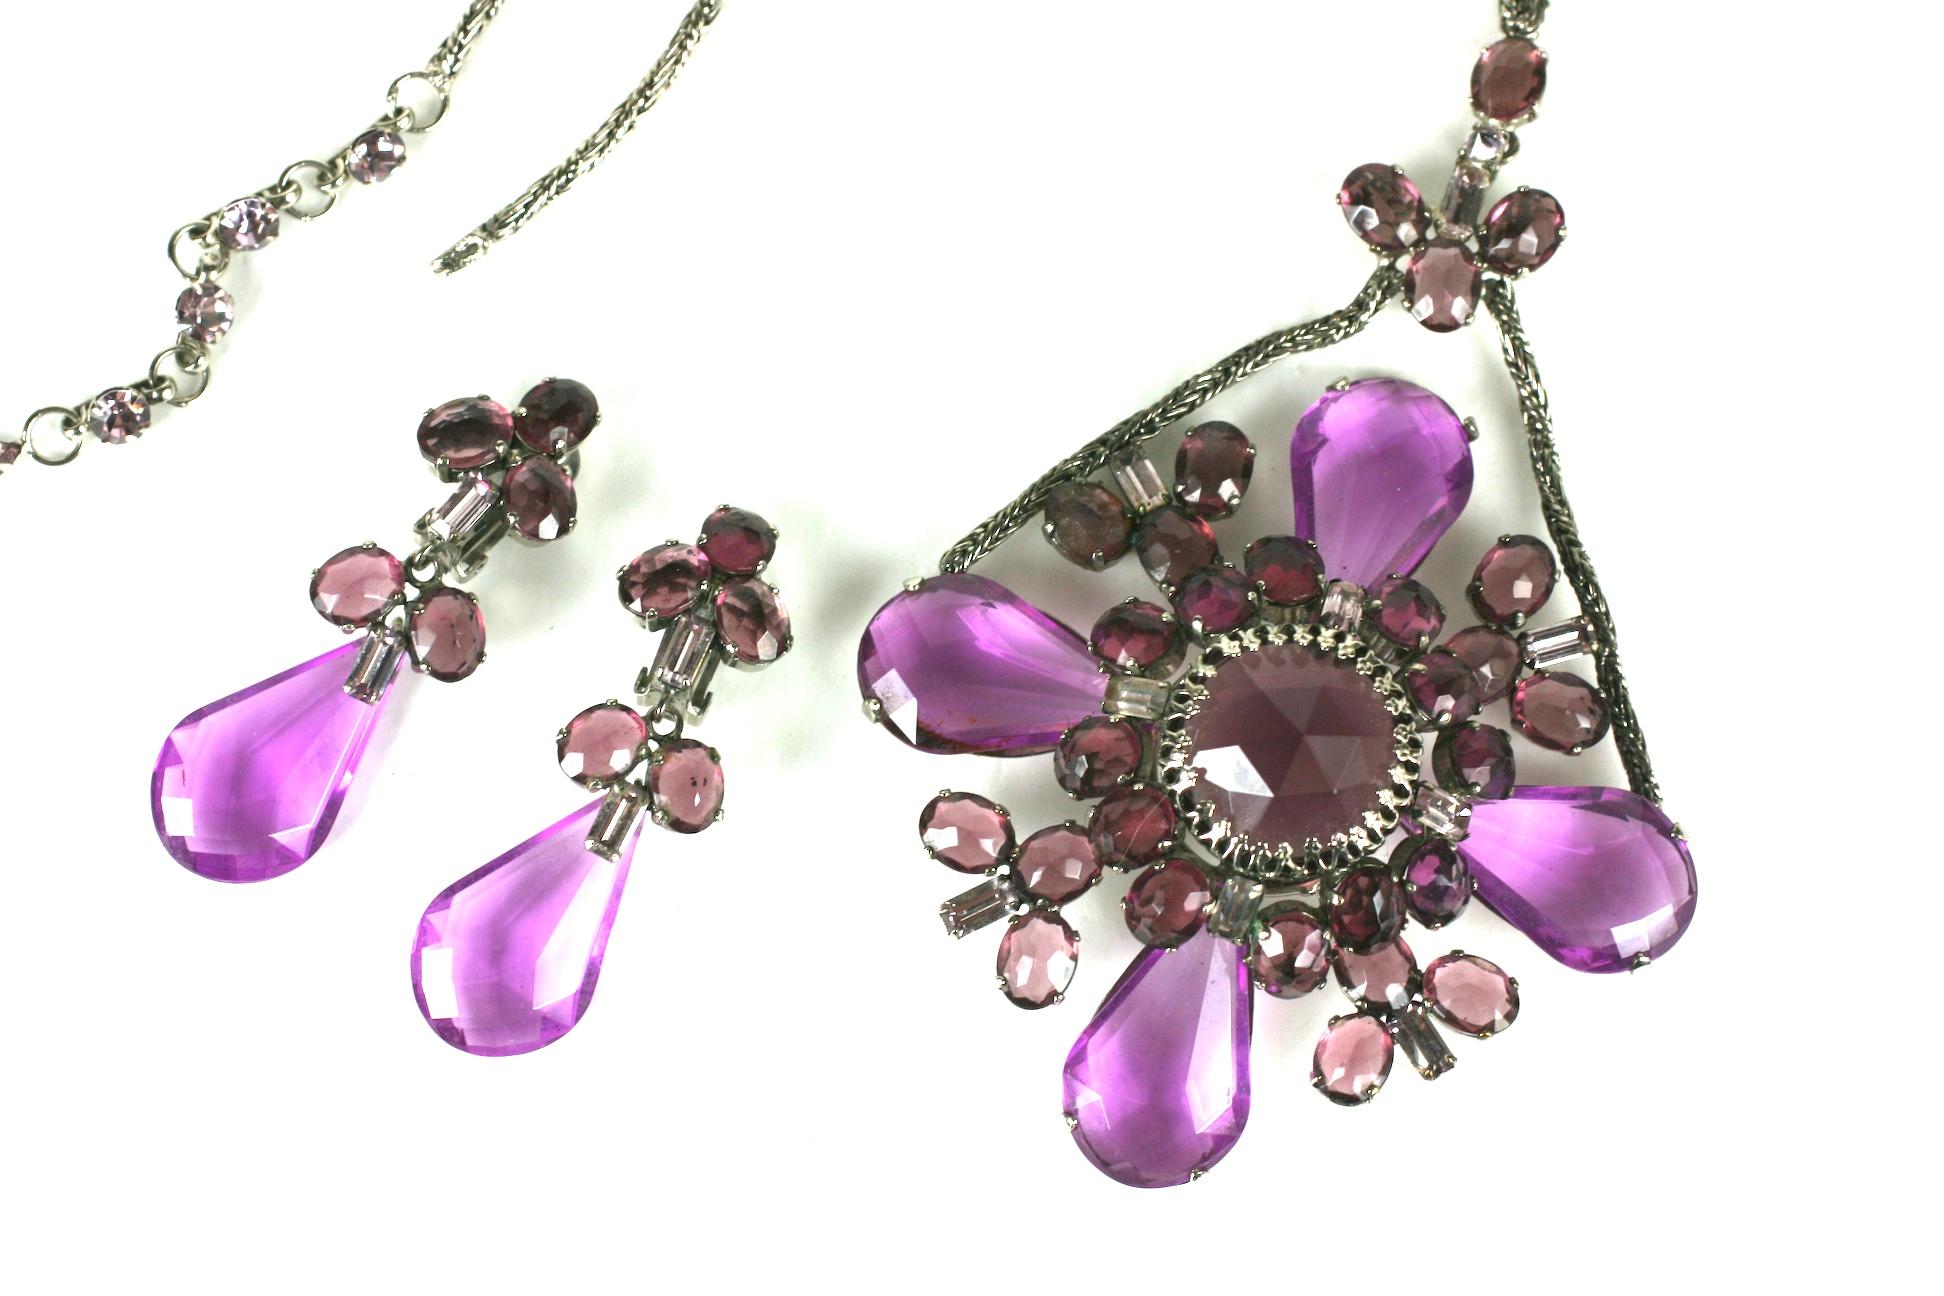 Important and impressive Schreiner Pendant Necklace and Earrings. Transformable necklace with detachable pendant which becomes a large brooch. 
2 tones of amythest lucite stones are mixed with pave baguettes throughout the suite. Signed on clip back